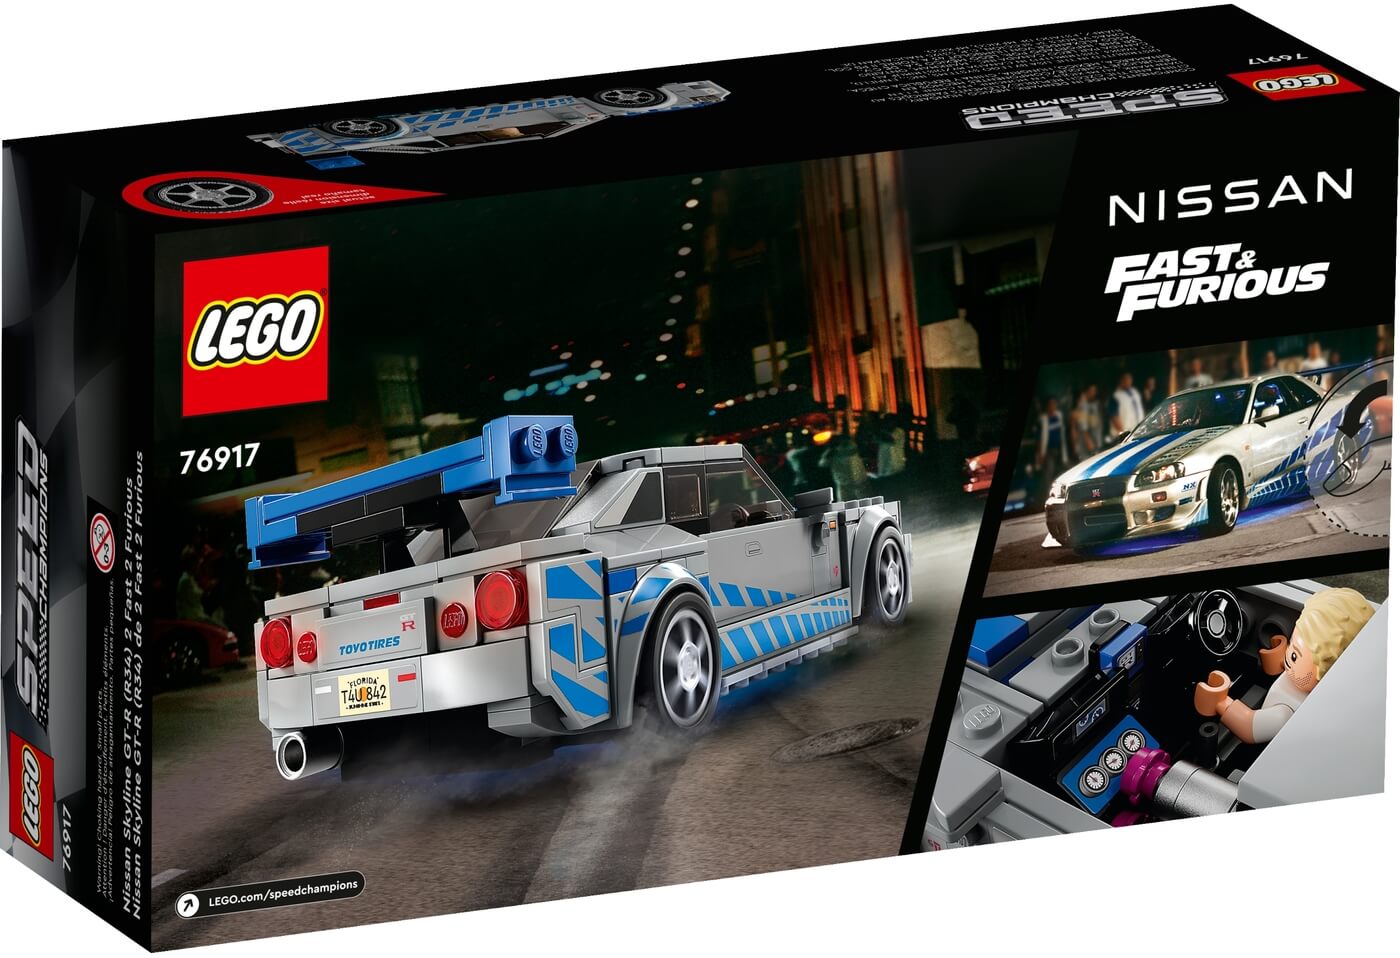 Nissan Skyline GT-R R34 Fast and Furious ( Lego 76917 ) imagen f